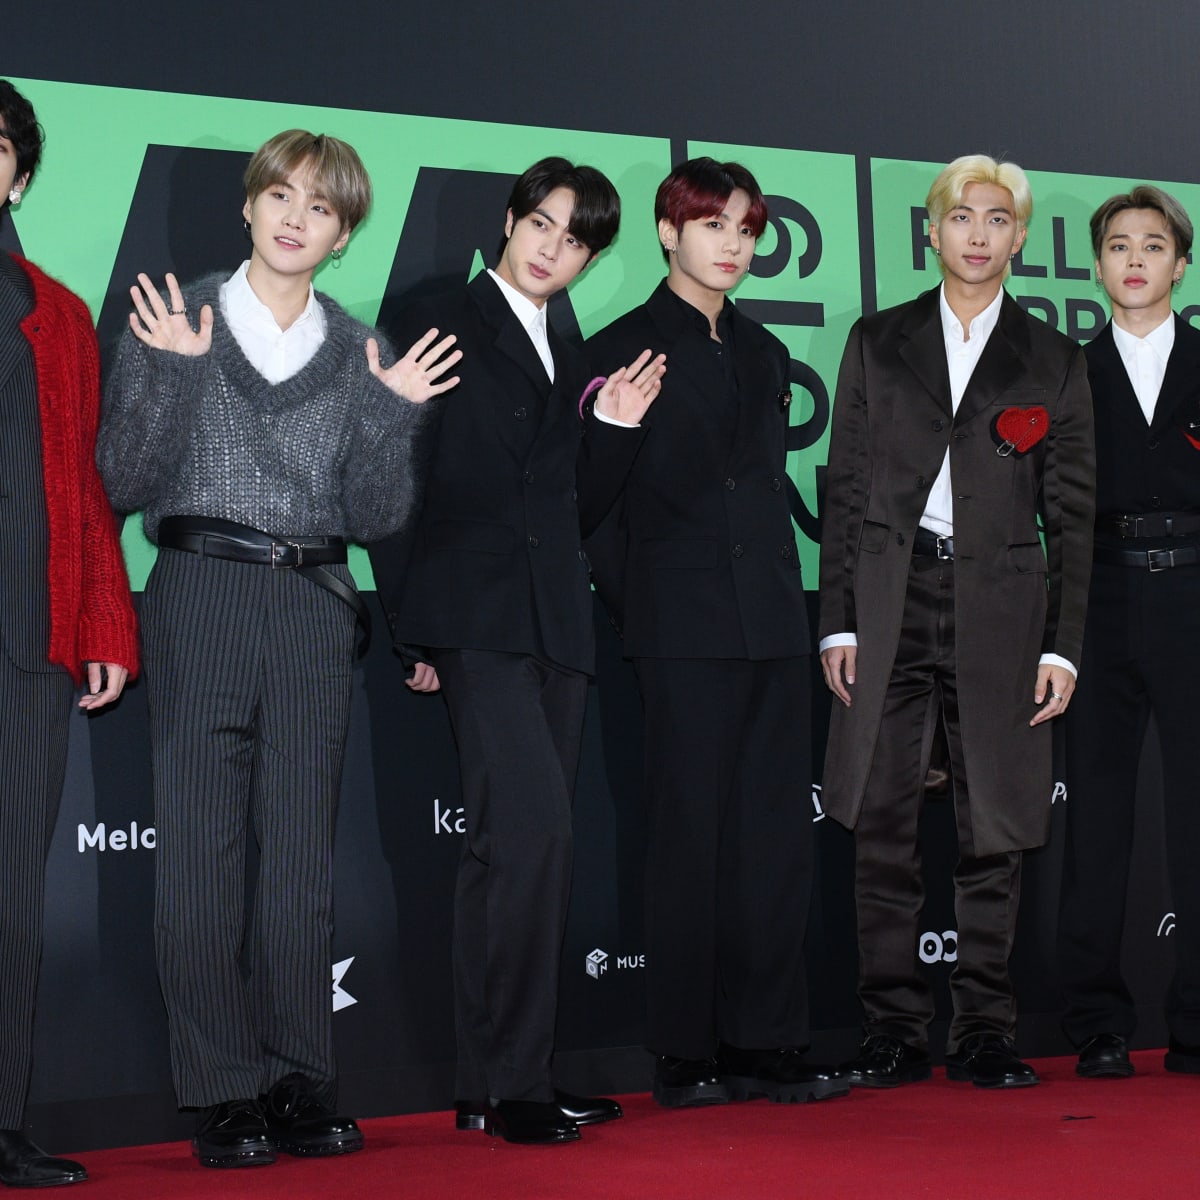 BTS Wore Amazing Outfits for Their Grammys 2020 Performance With